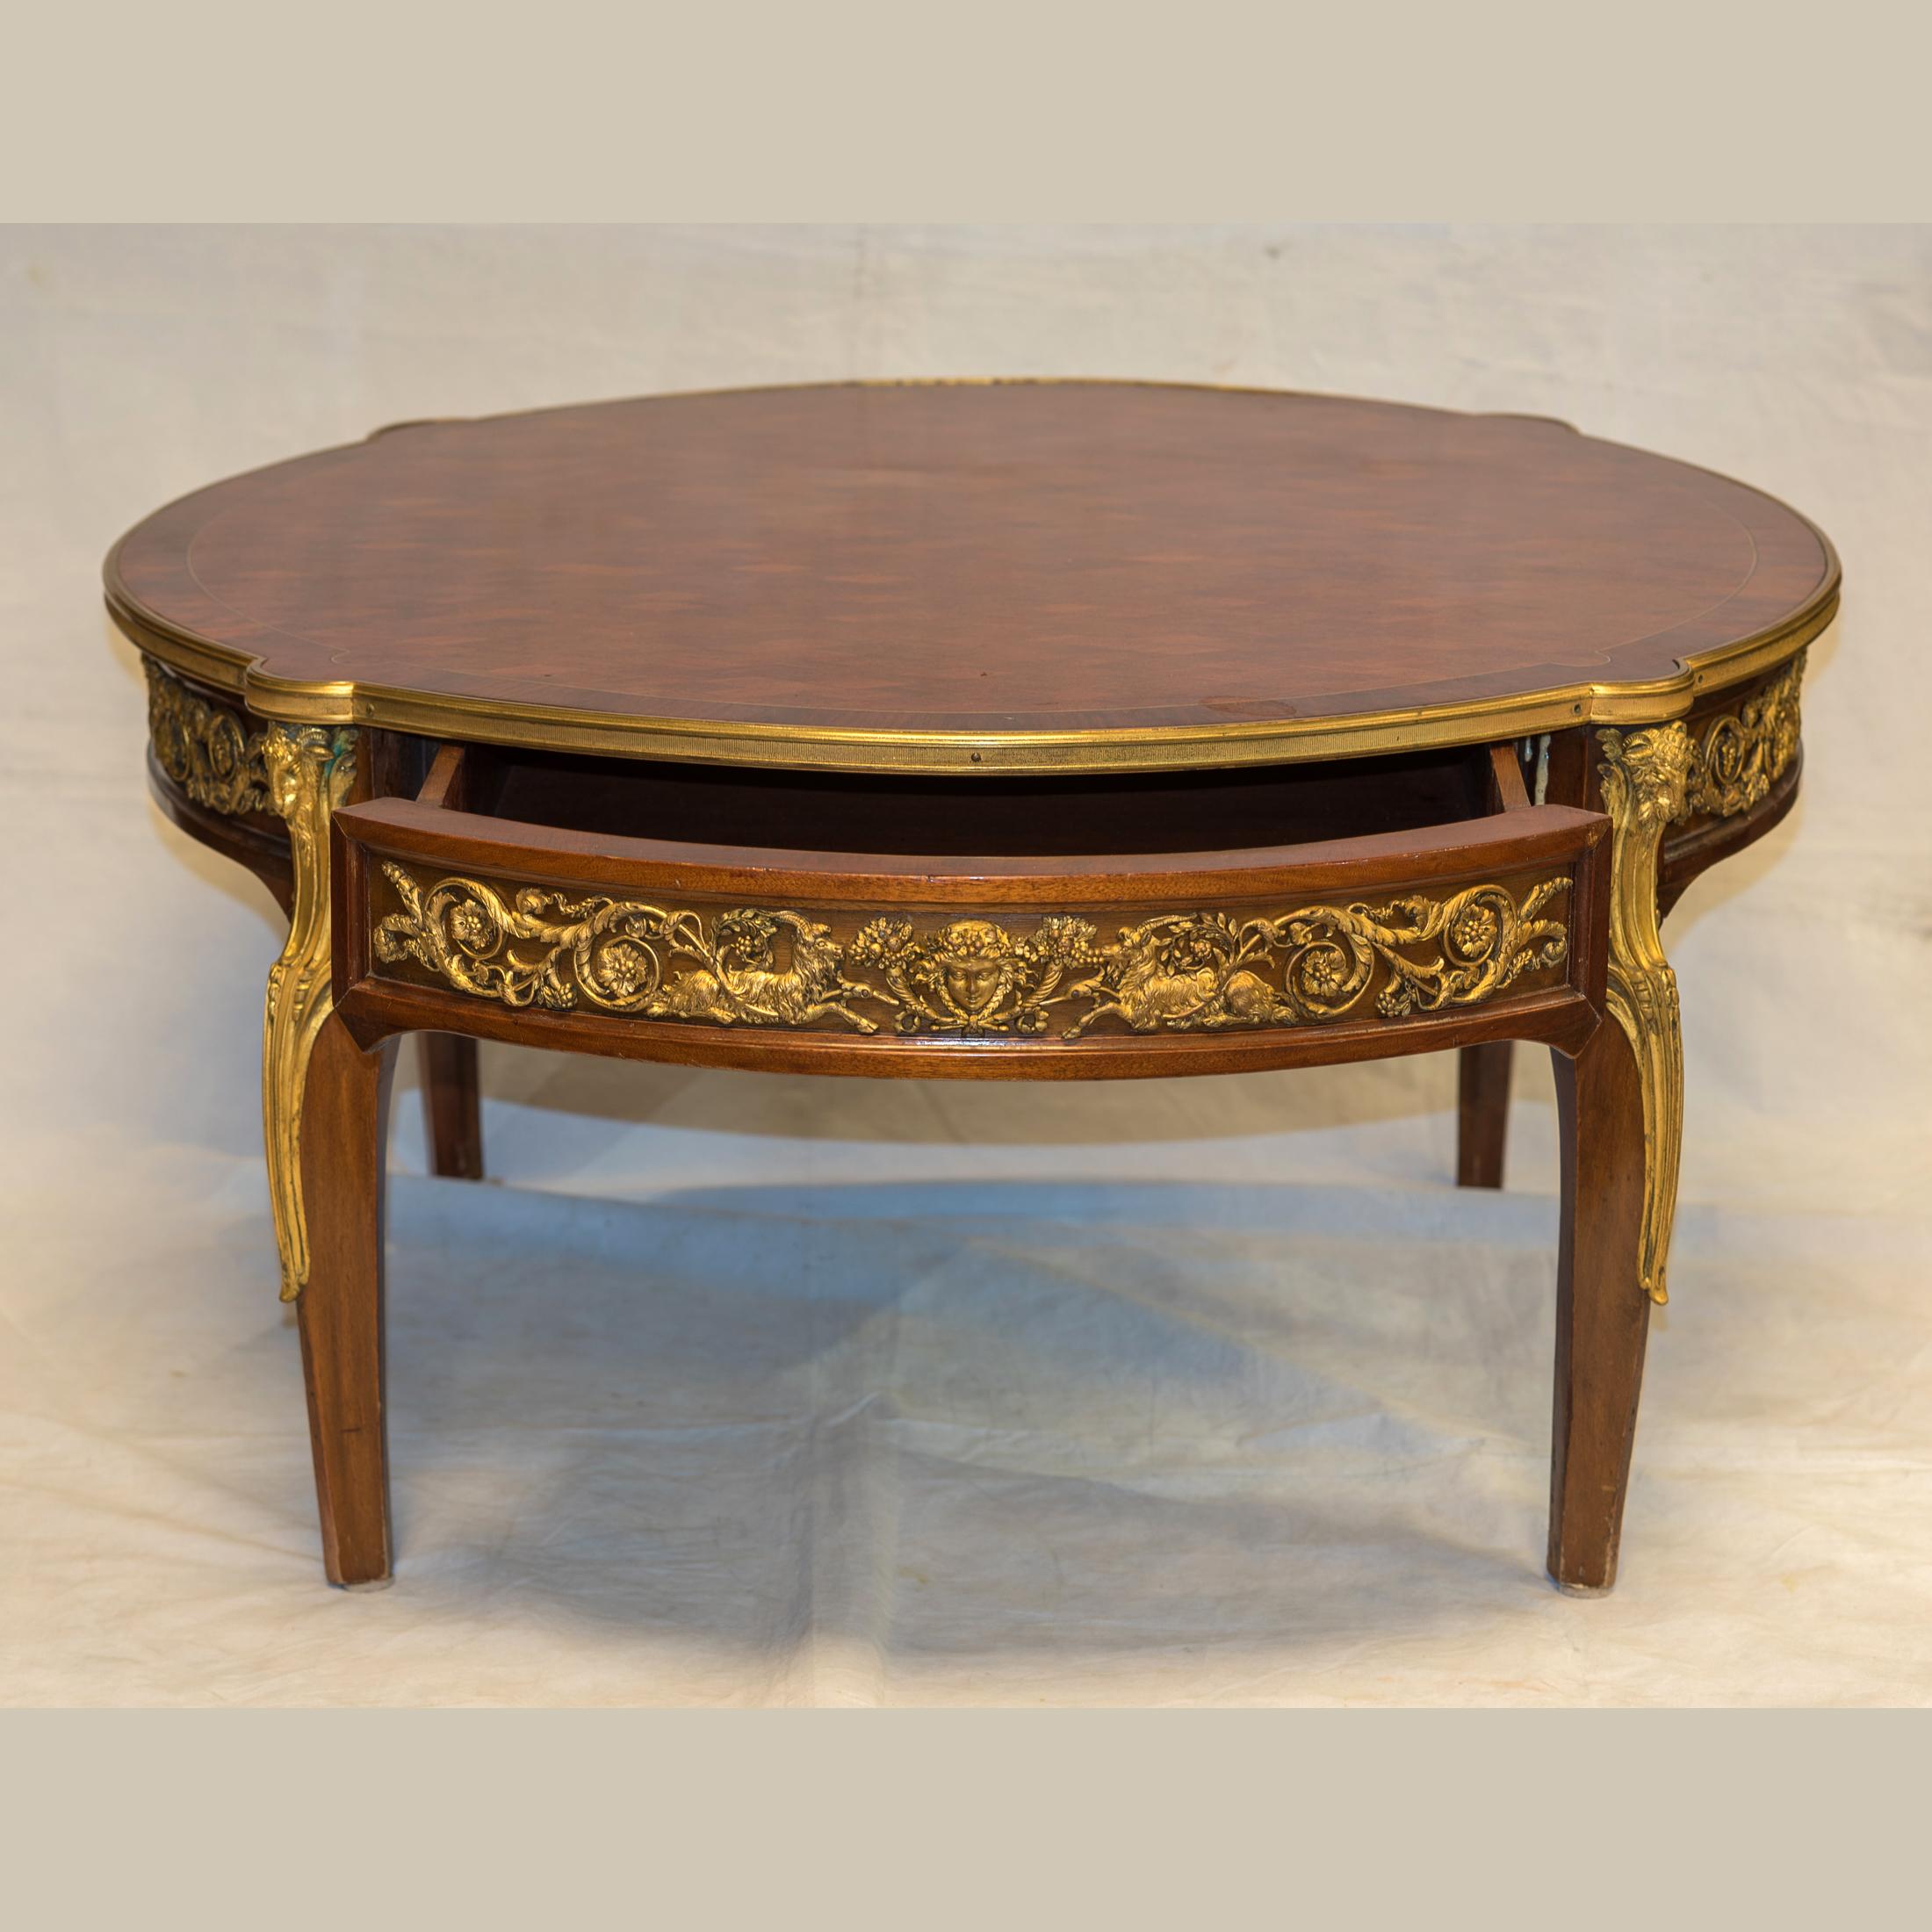 French Louis XVI Style Ormolu-Mounted Cube Parquetry Low Round Coffee Table